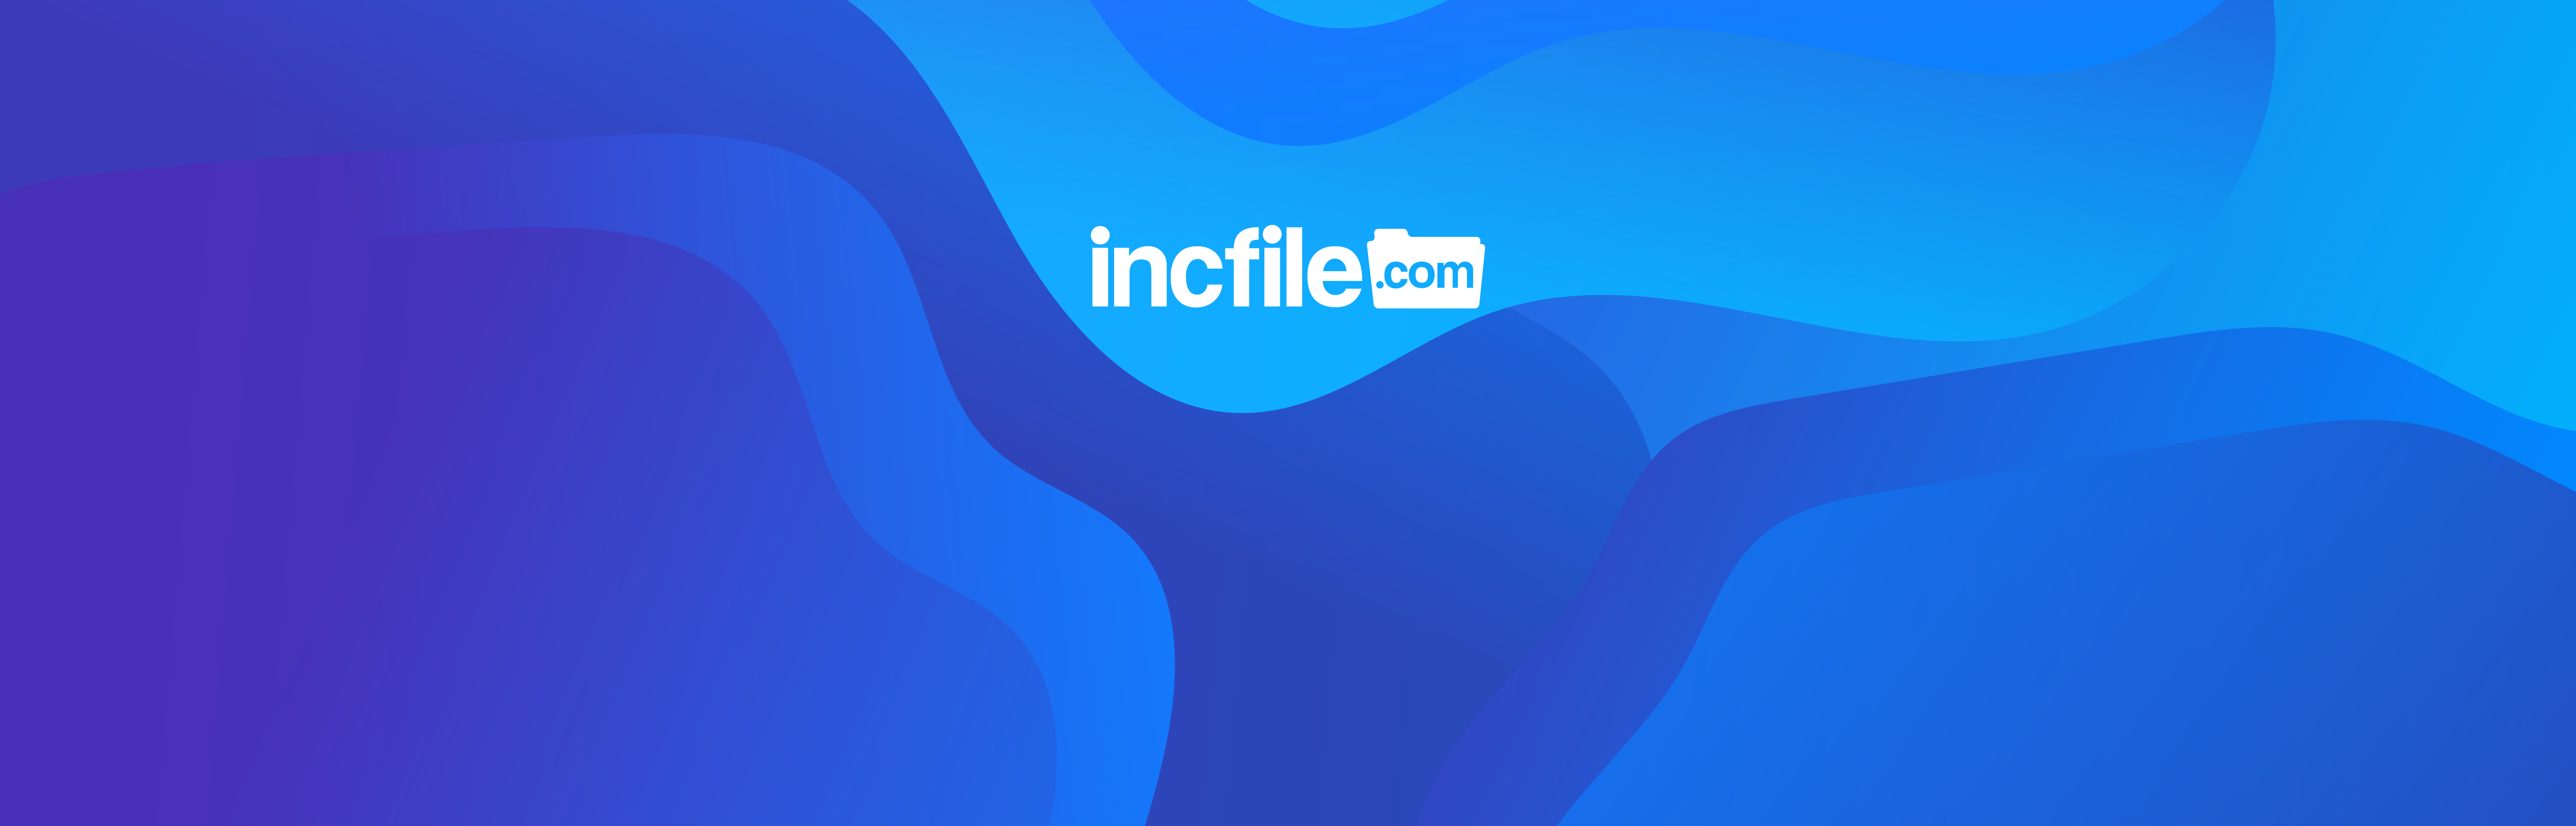 How Does Incfile Show Up In Search